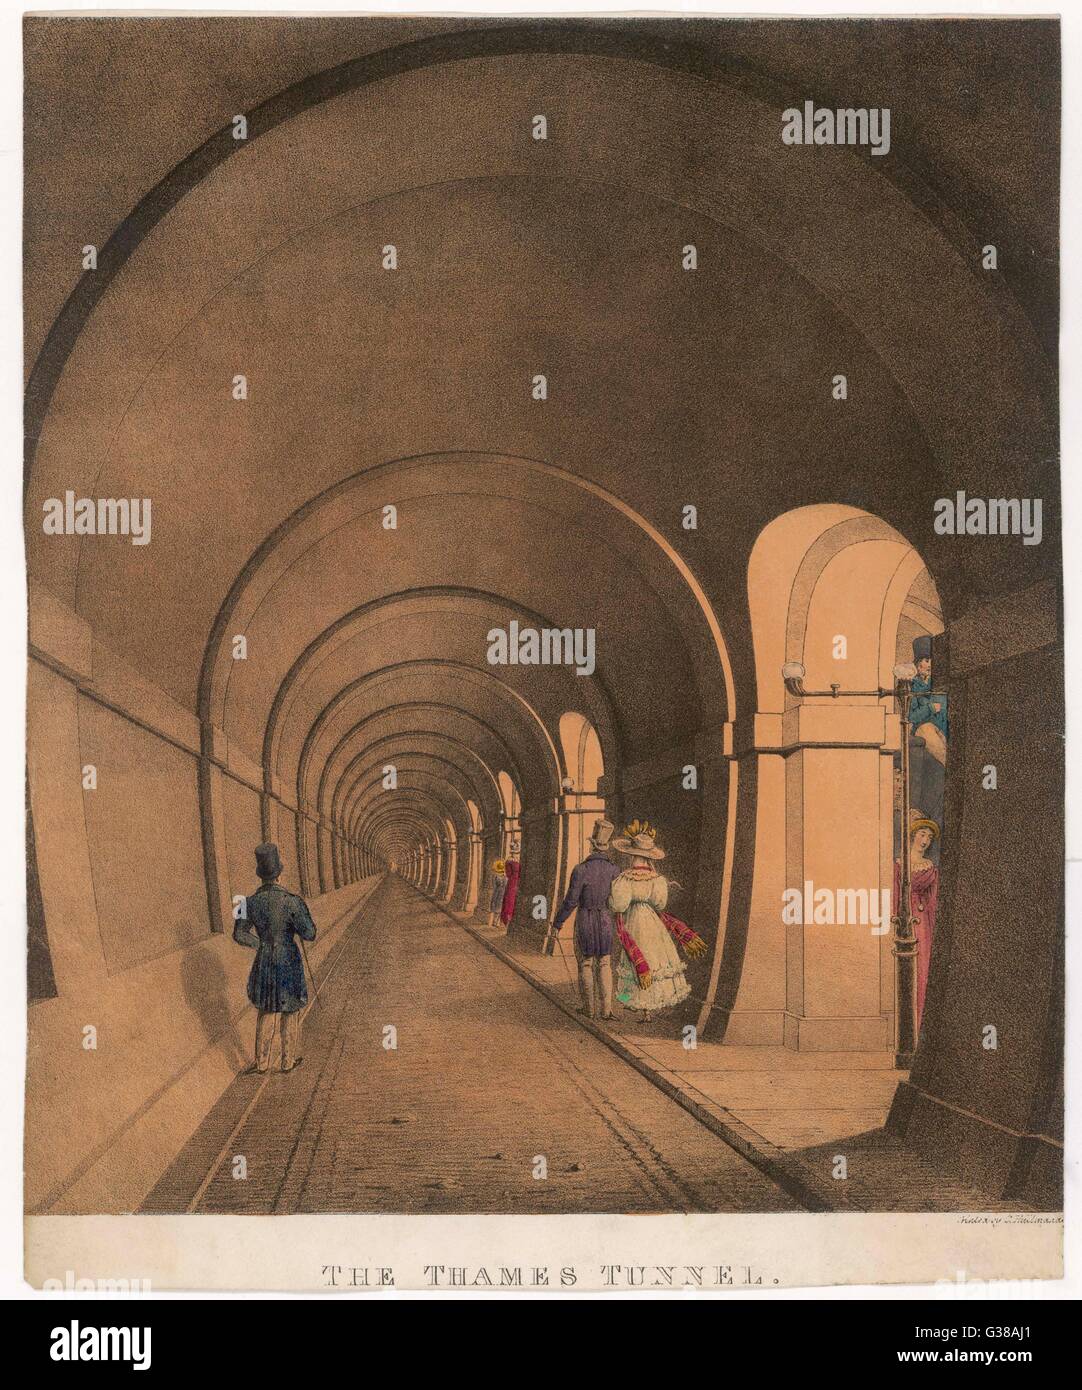 Brunel's Thames Tunnel          Date: 1843 Stock Photo